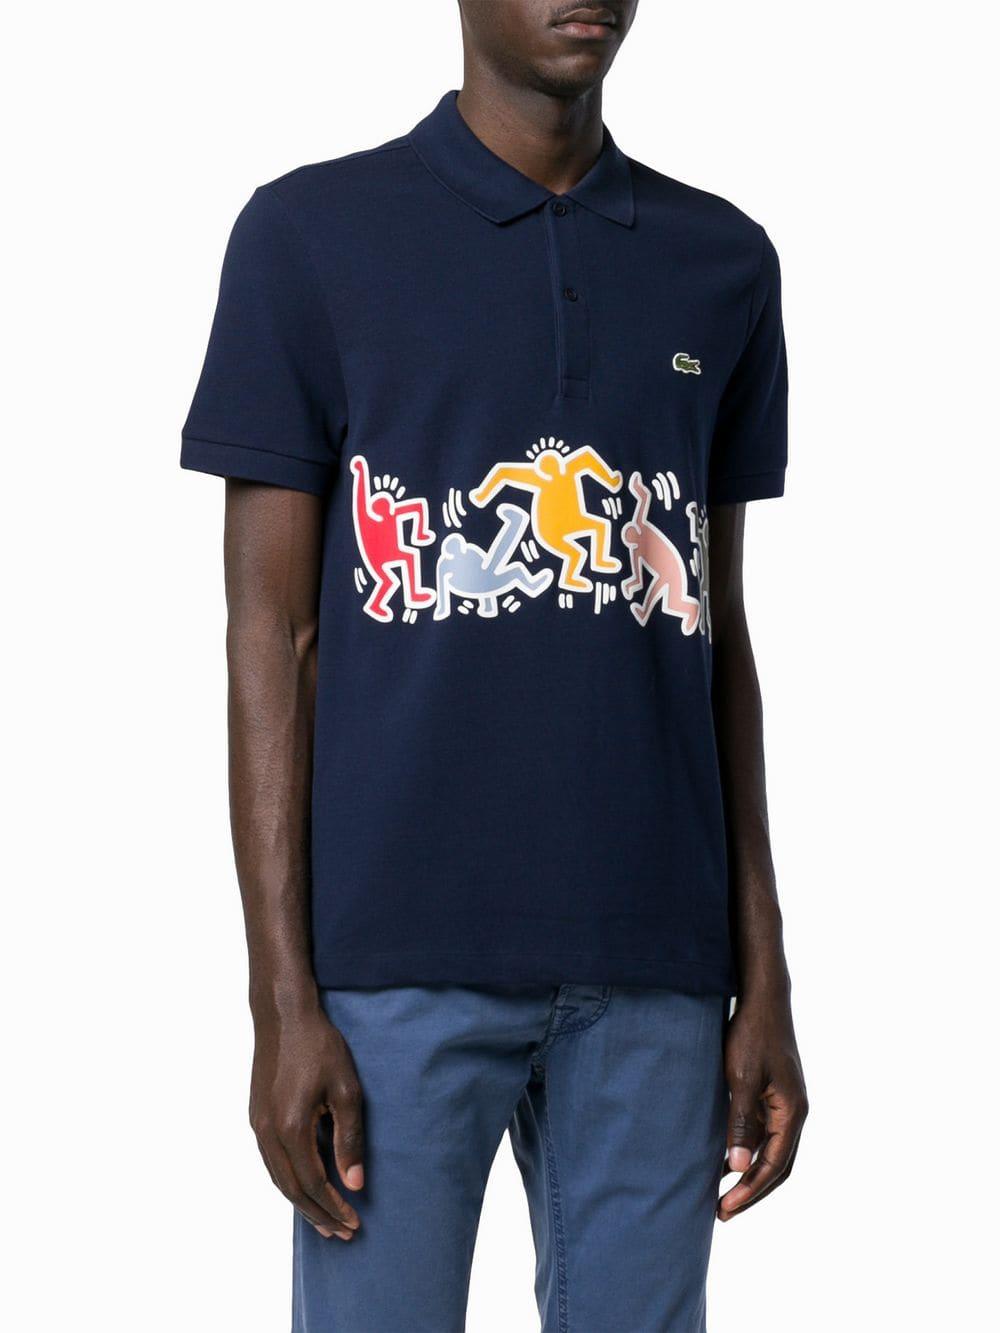 Lacoste X Keith Haring Printed Band Polo Shirt in Blue for Men - Lyst